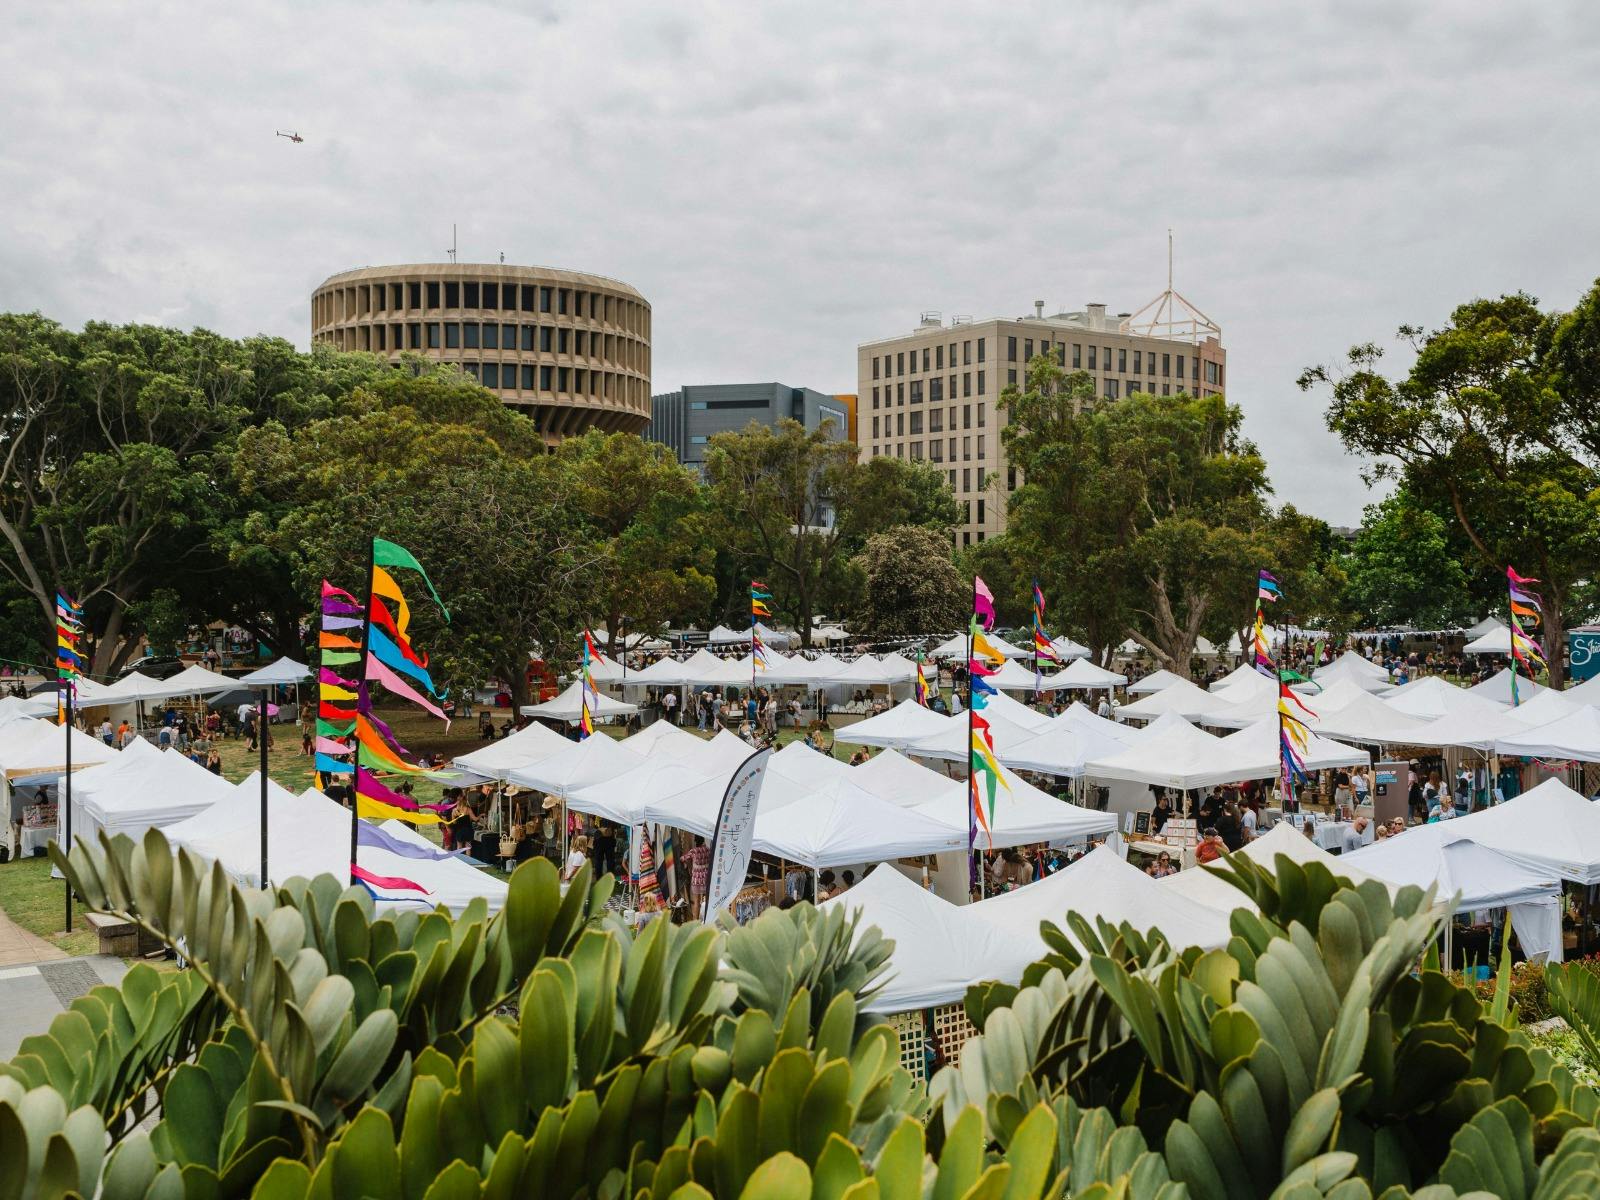 The Olive Tree Market pops up every month in Civic Park at The Olive Tree Market